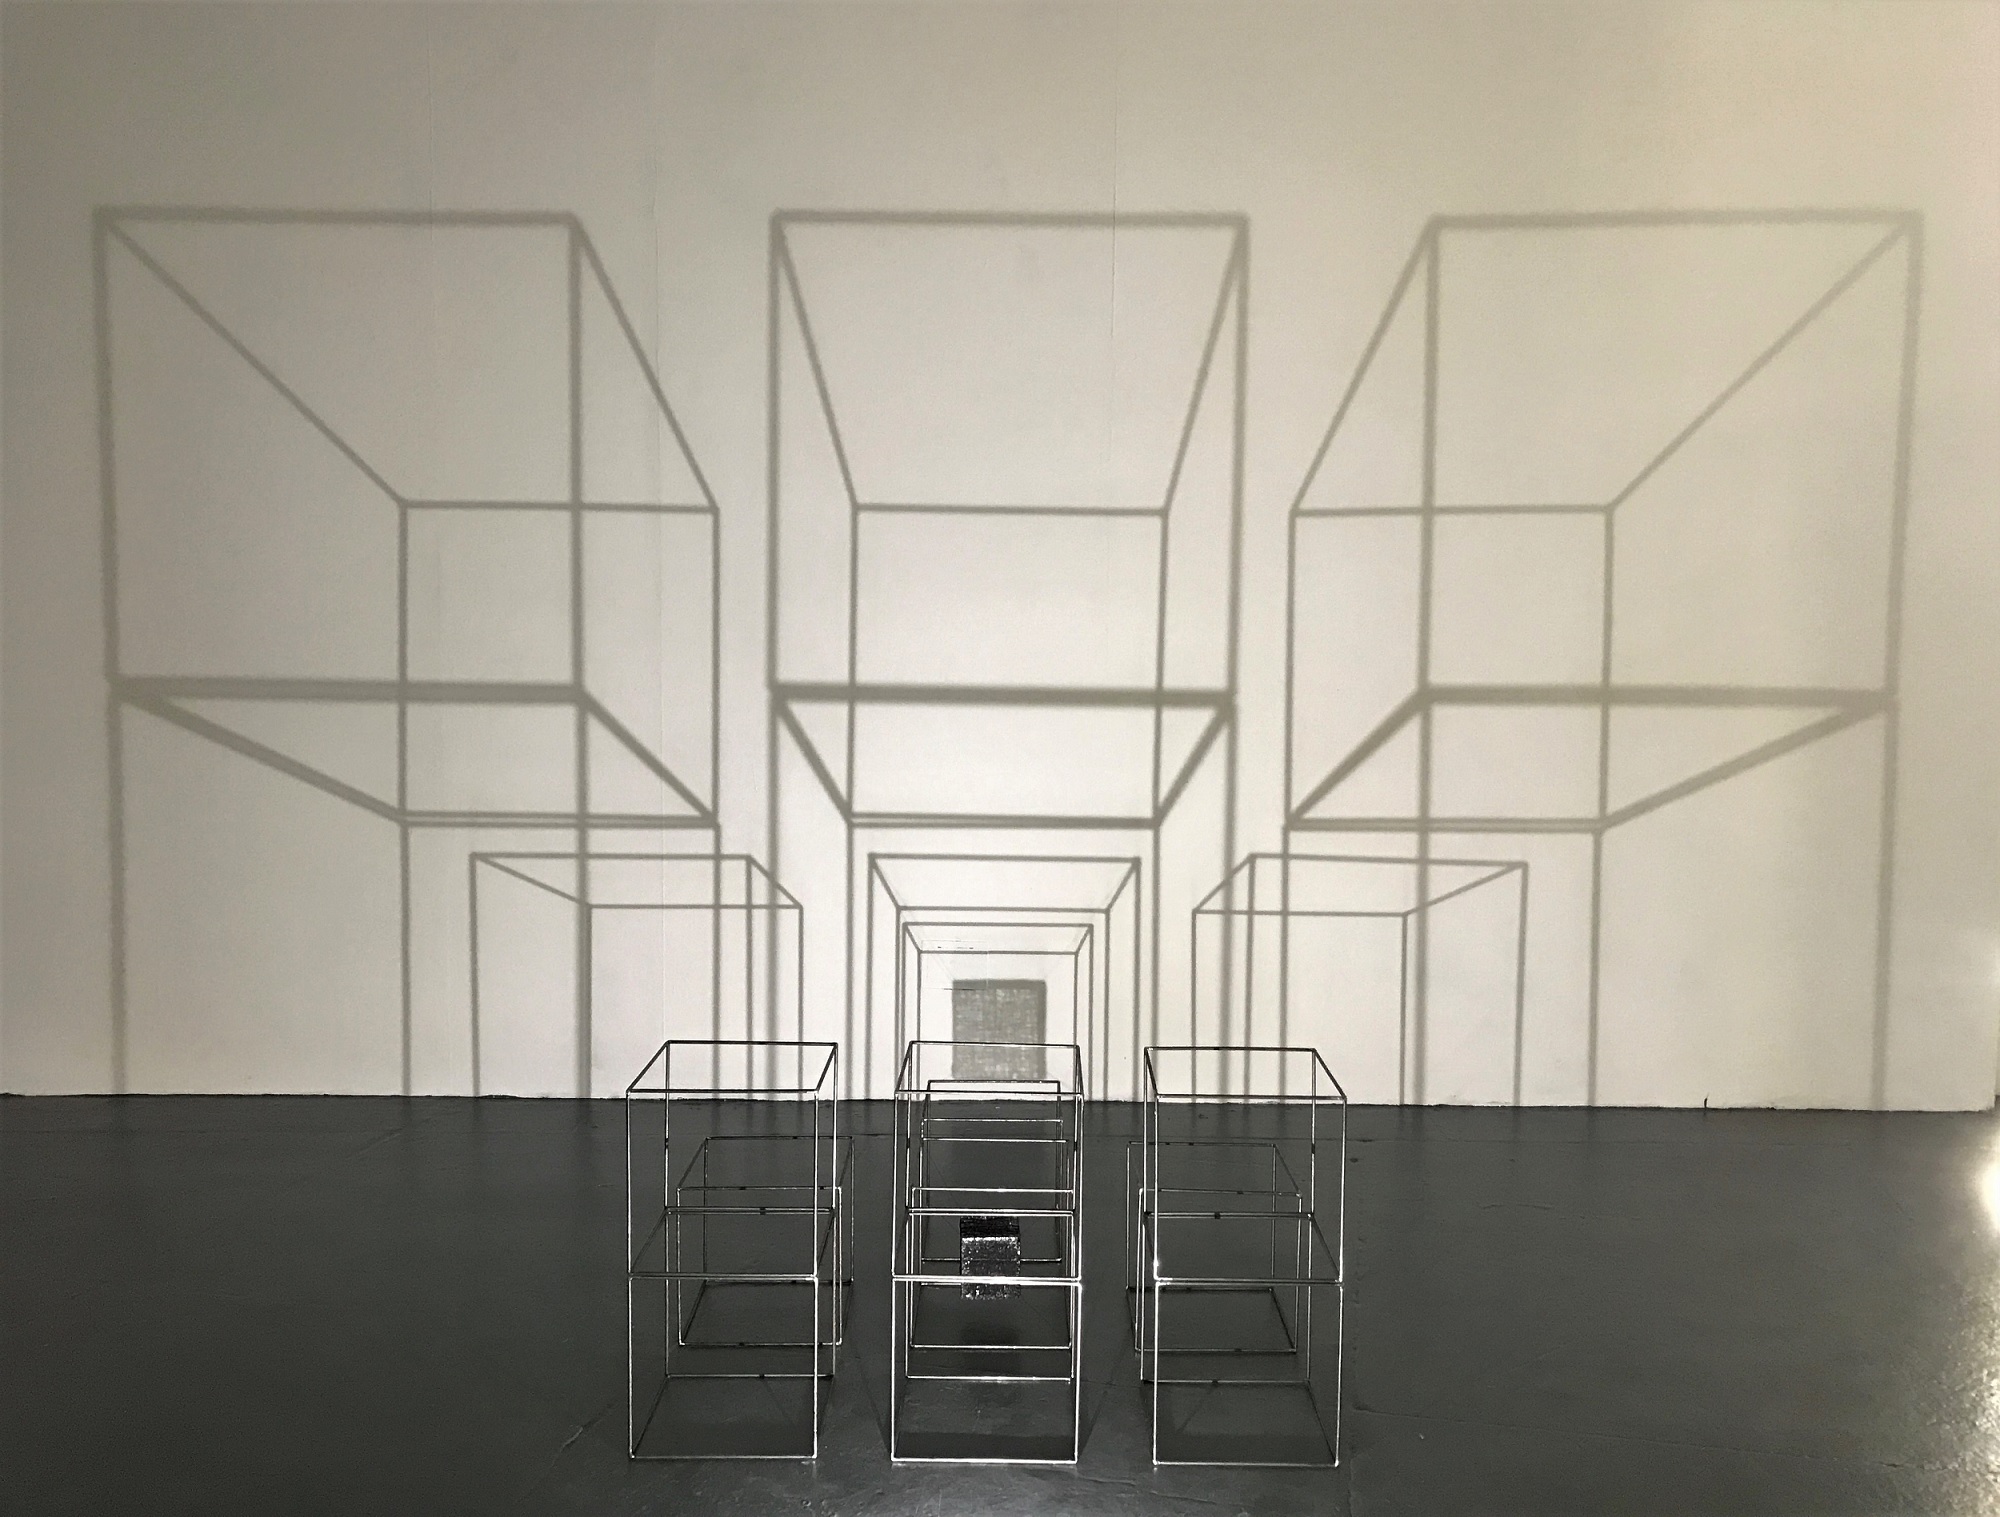 Sculpture by Jo Bellamy. Steel cubes and a smaller fragile thread cube, stacked and lit creating dramatic large shadows resembling large structures.